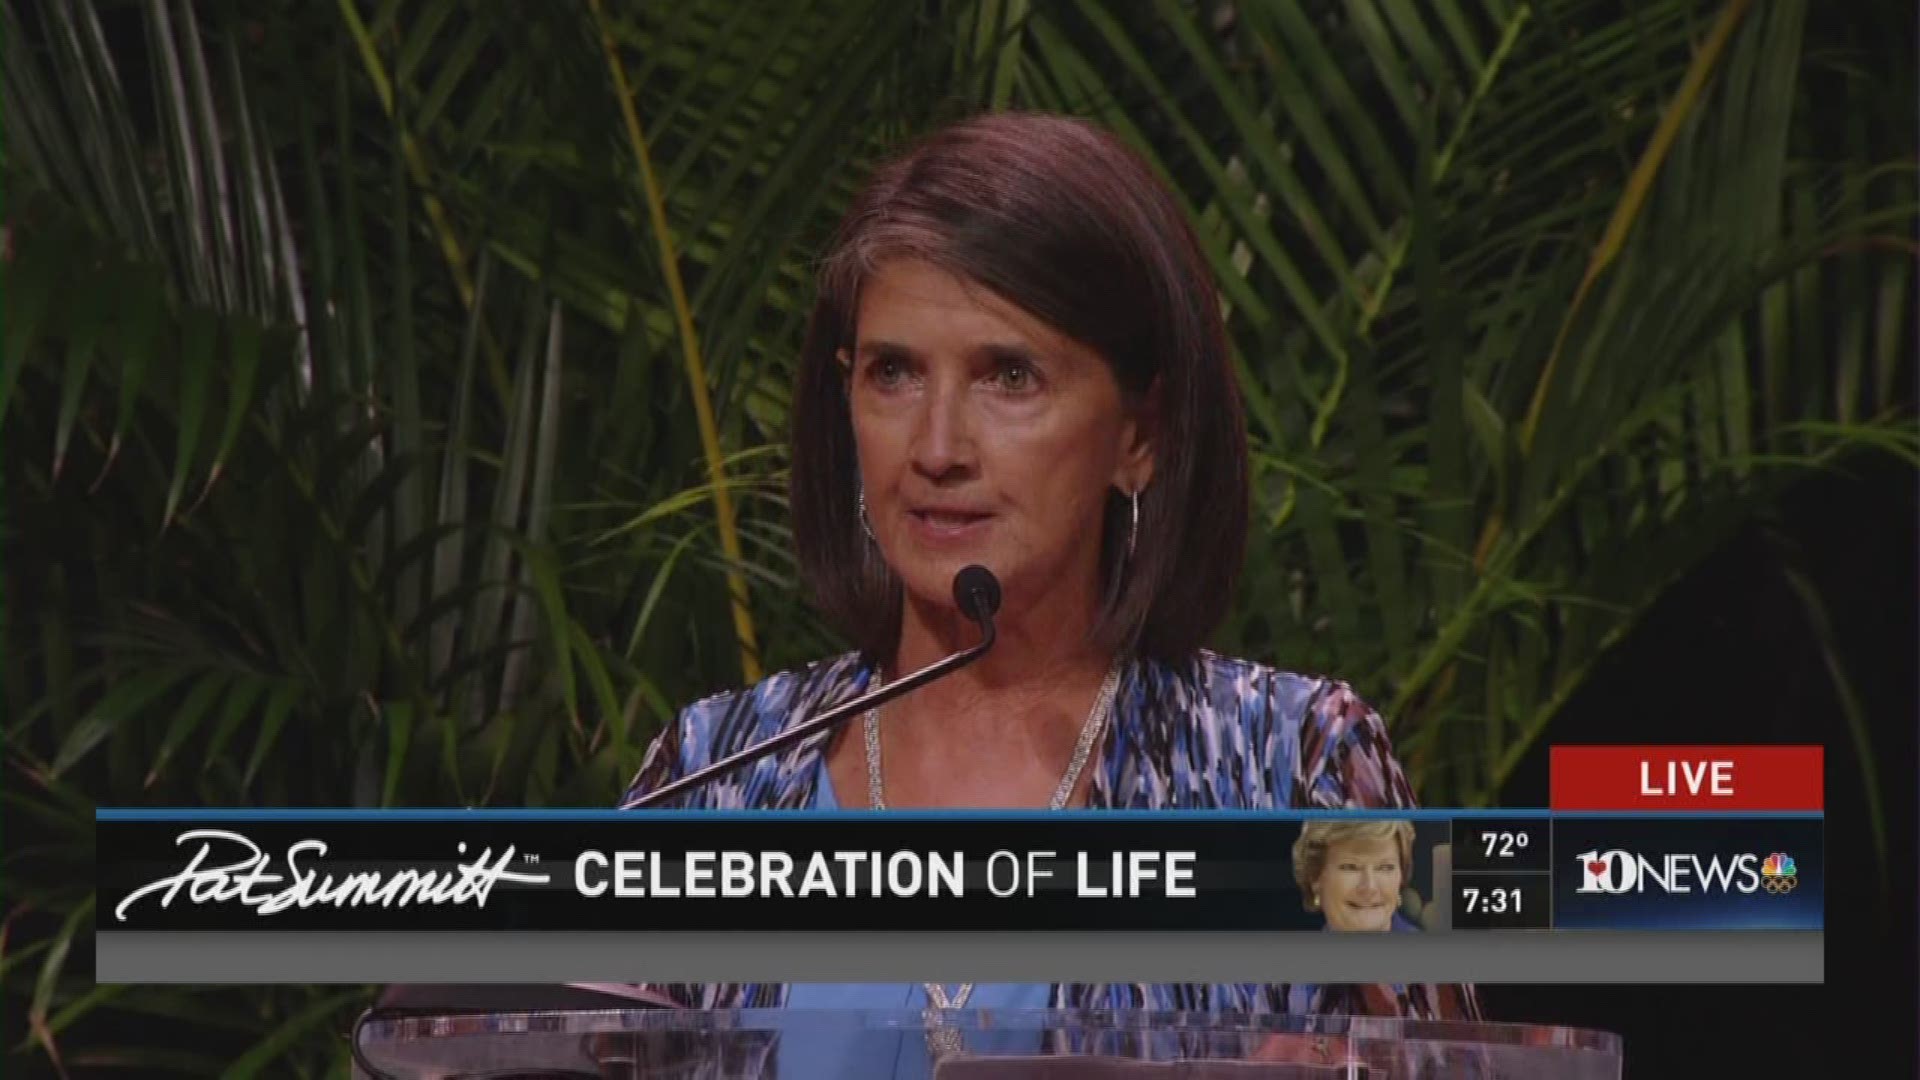 Mickie DeMoss talked about how Pat was a coach, friend, and family for so many.